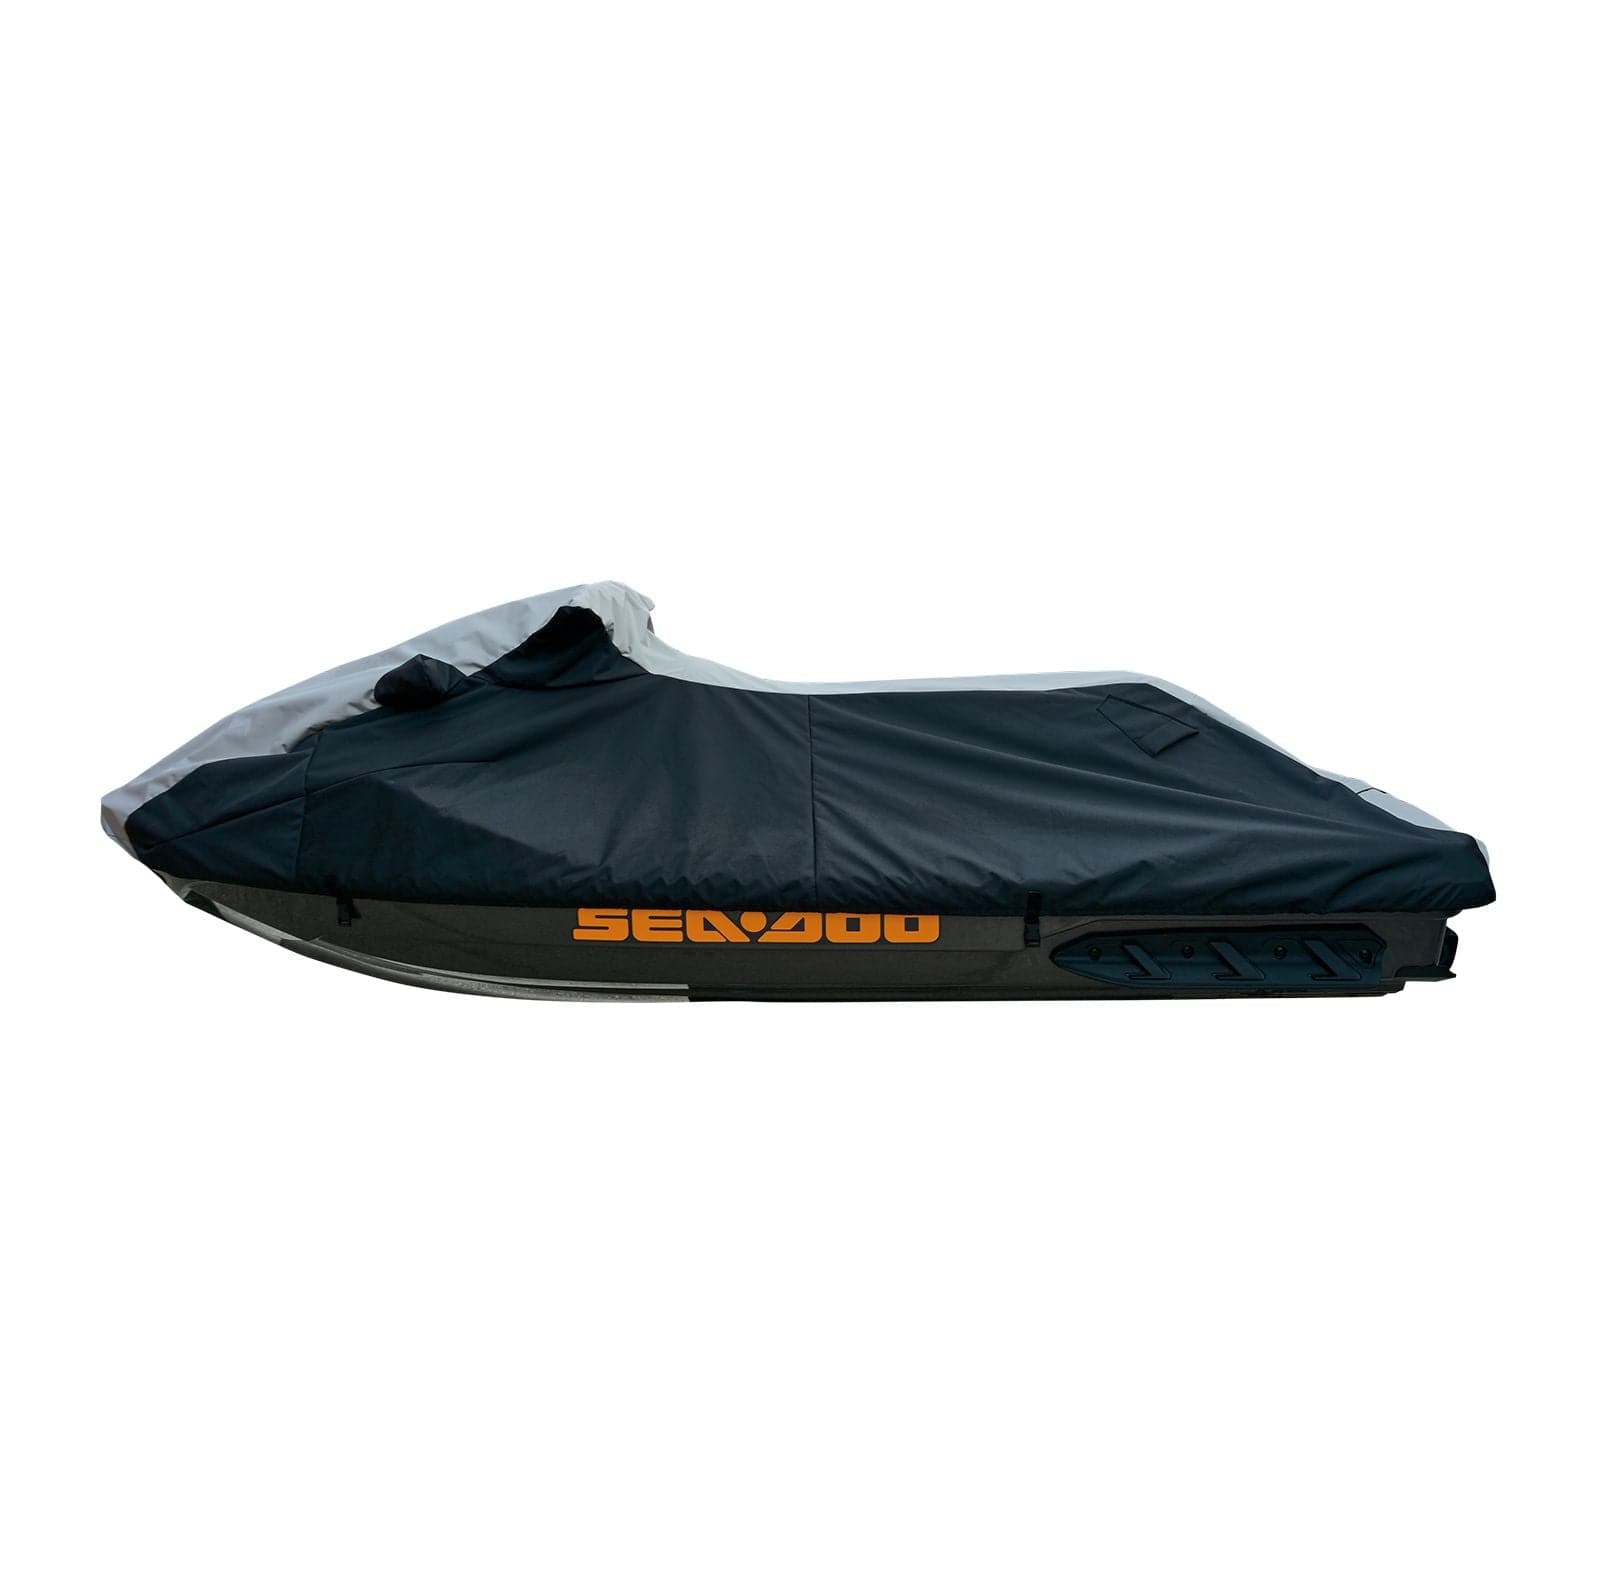 Trailerable Storage cover with vents for Sea-Doo GTX 155S, GTX Is, Ltd, RXT